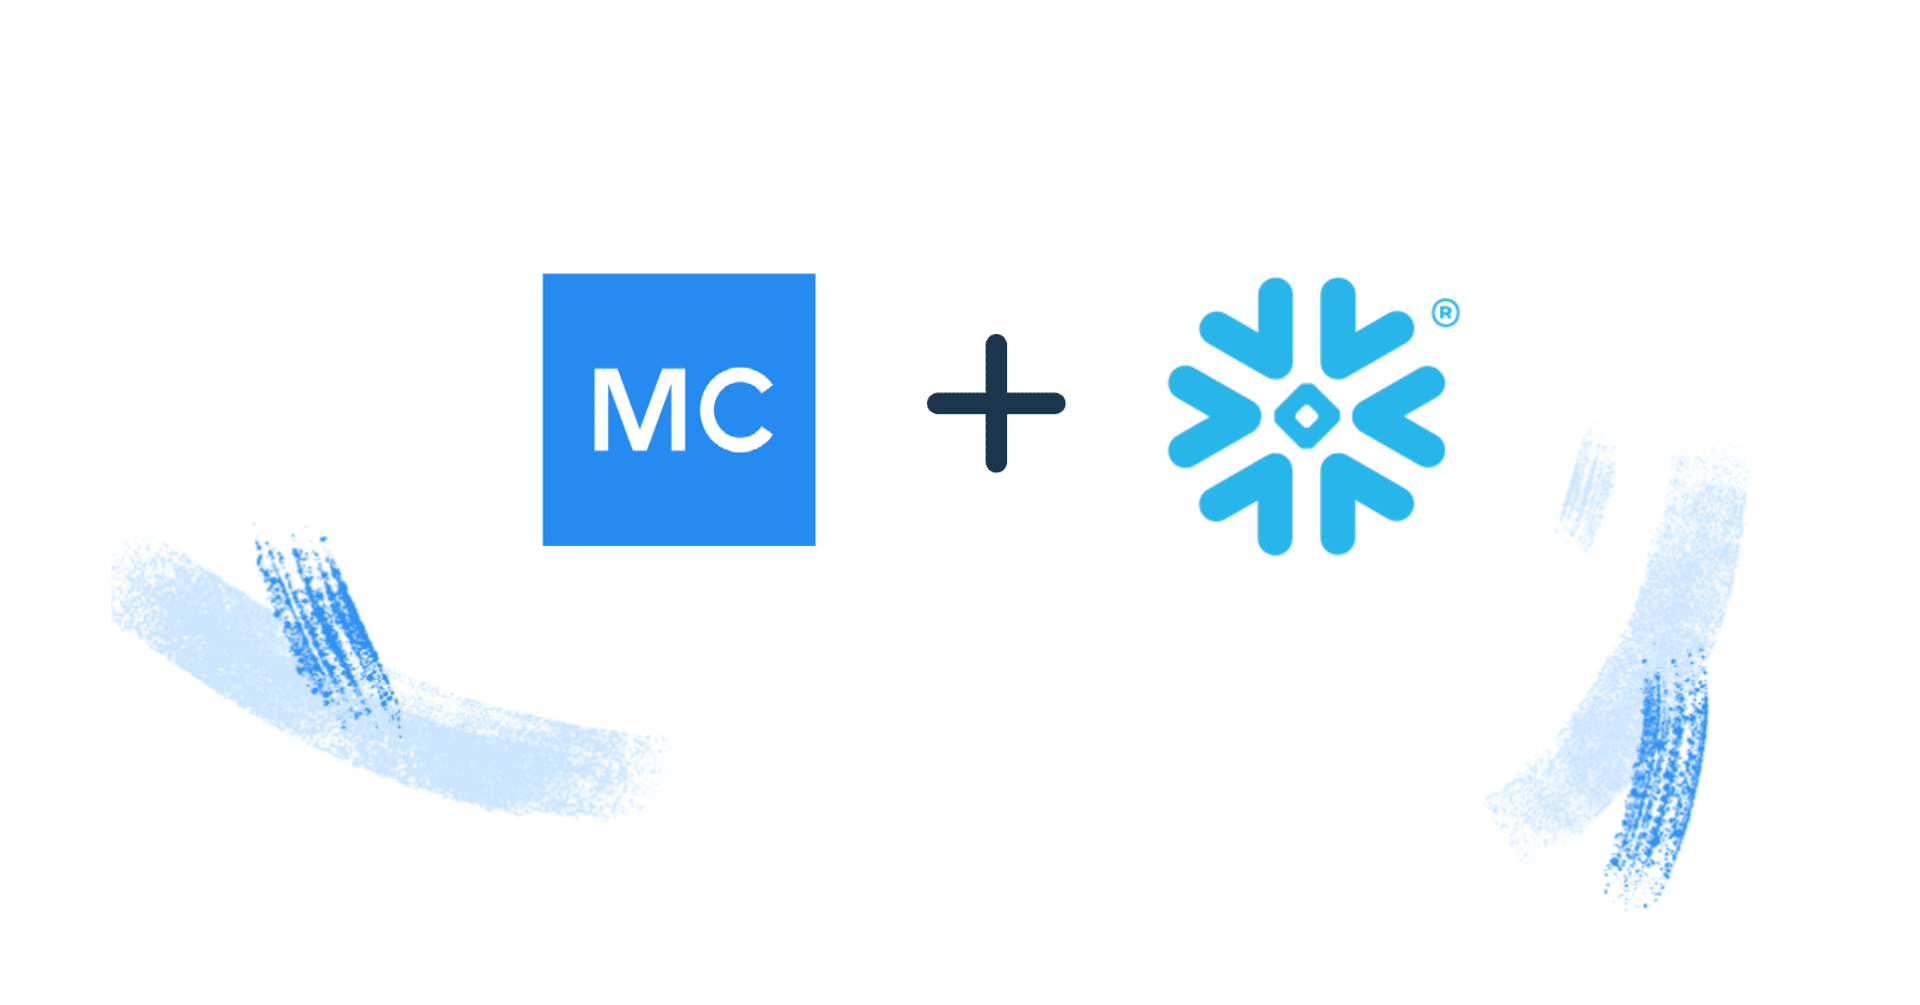 Monte Carlo announces integration with Snowflake’s Snowpark developer platform to deliver more secure data monitoring and observability